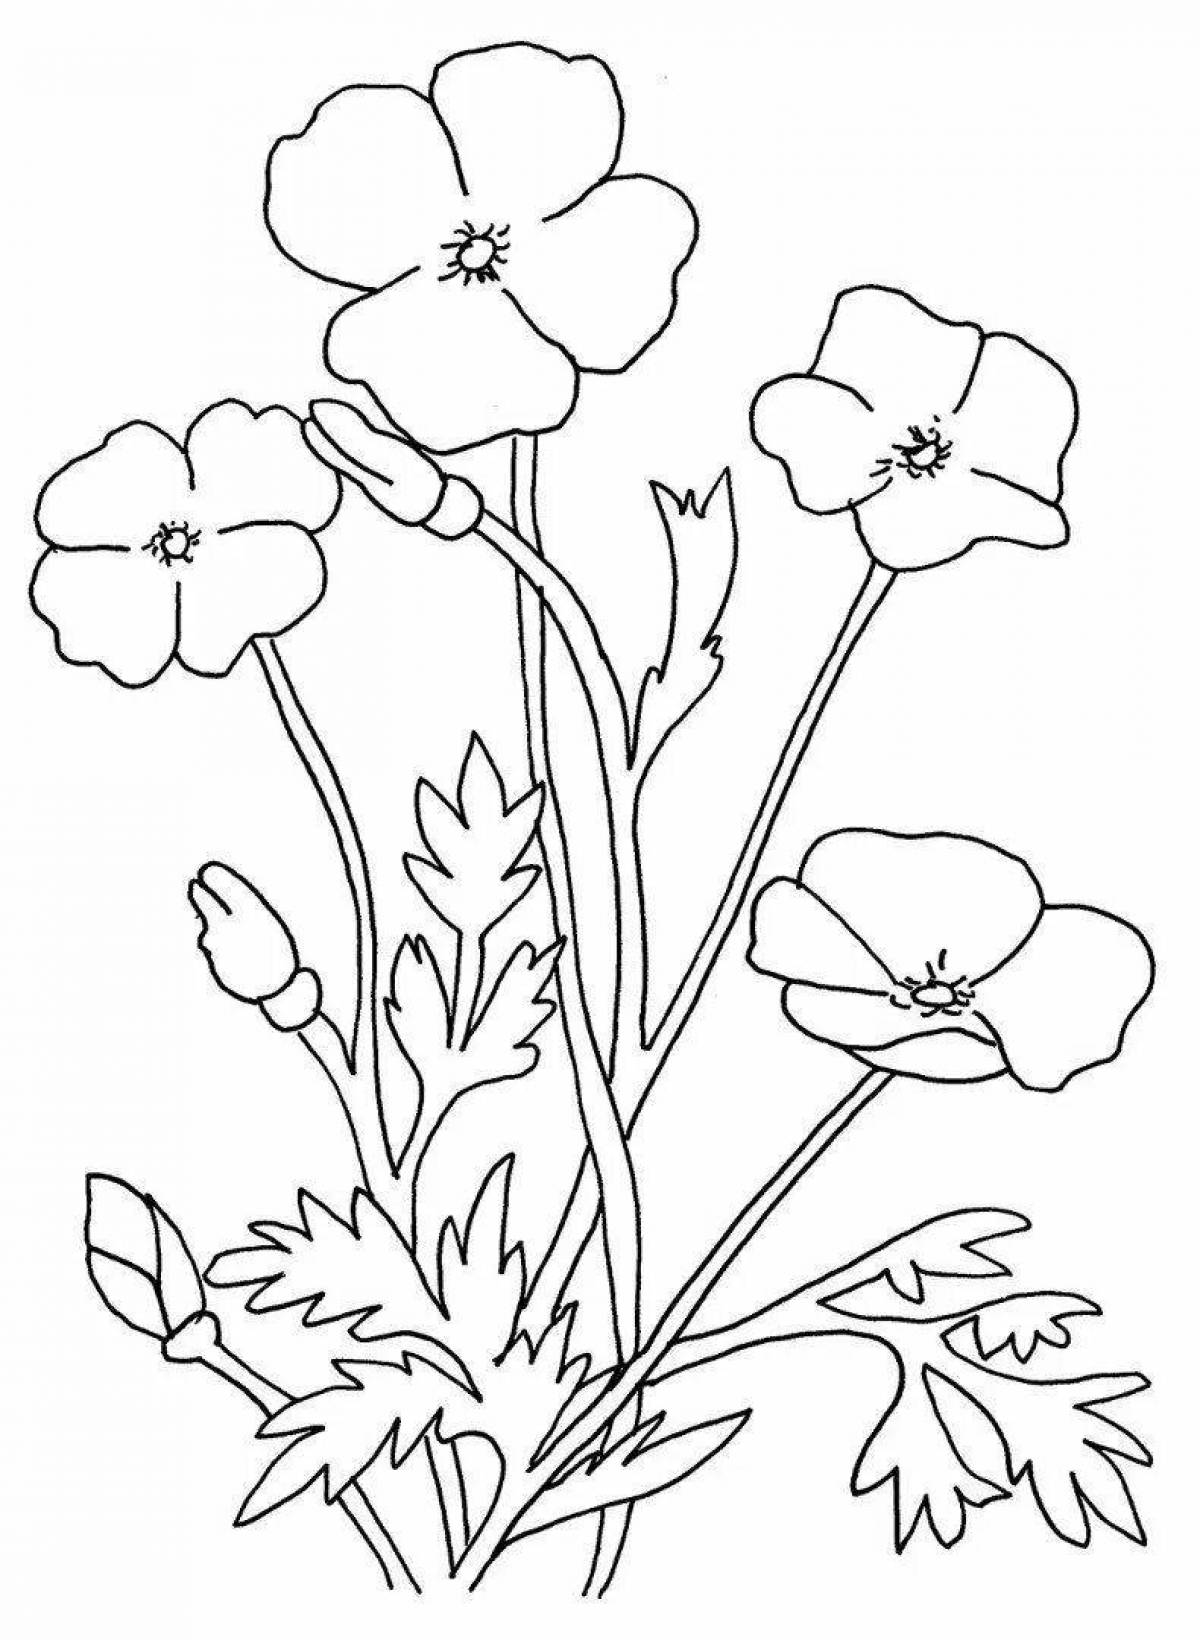 Colouring bright wildflowers for children